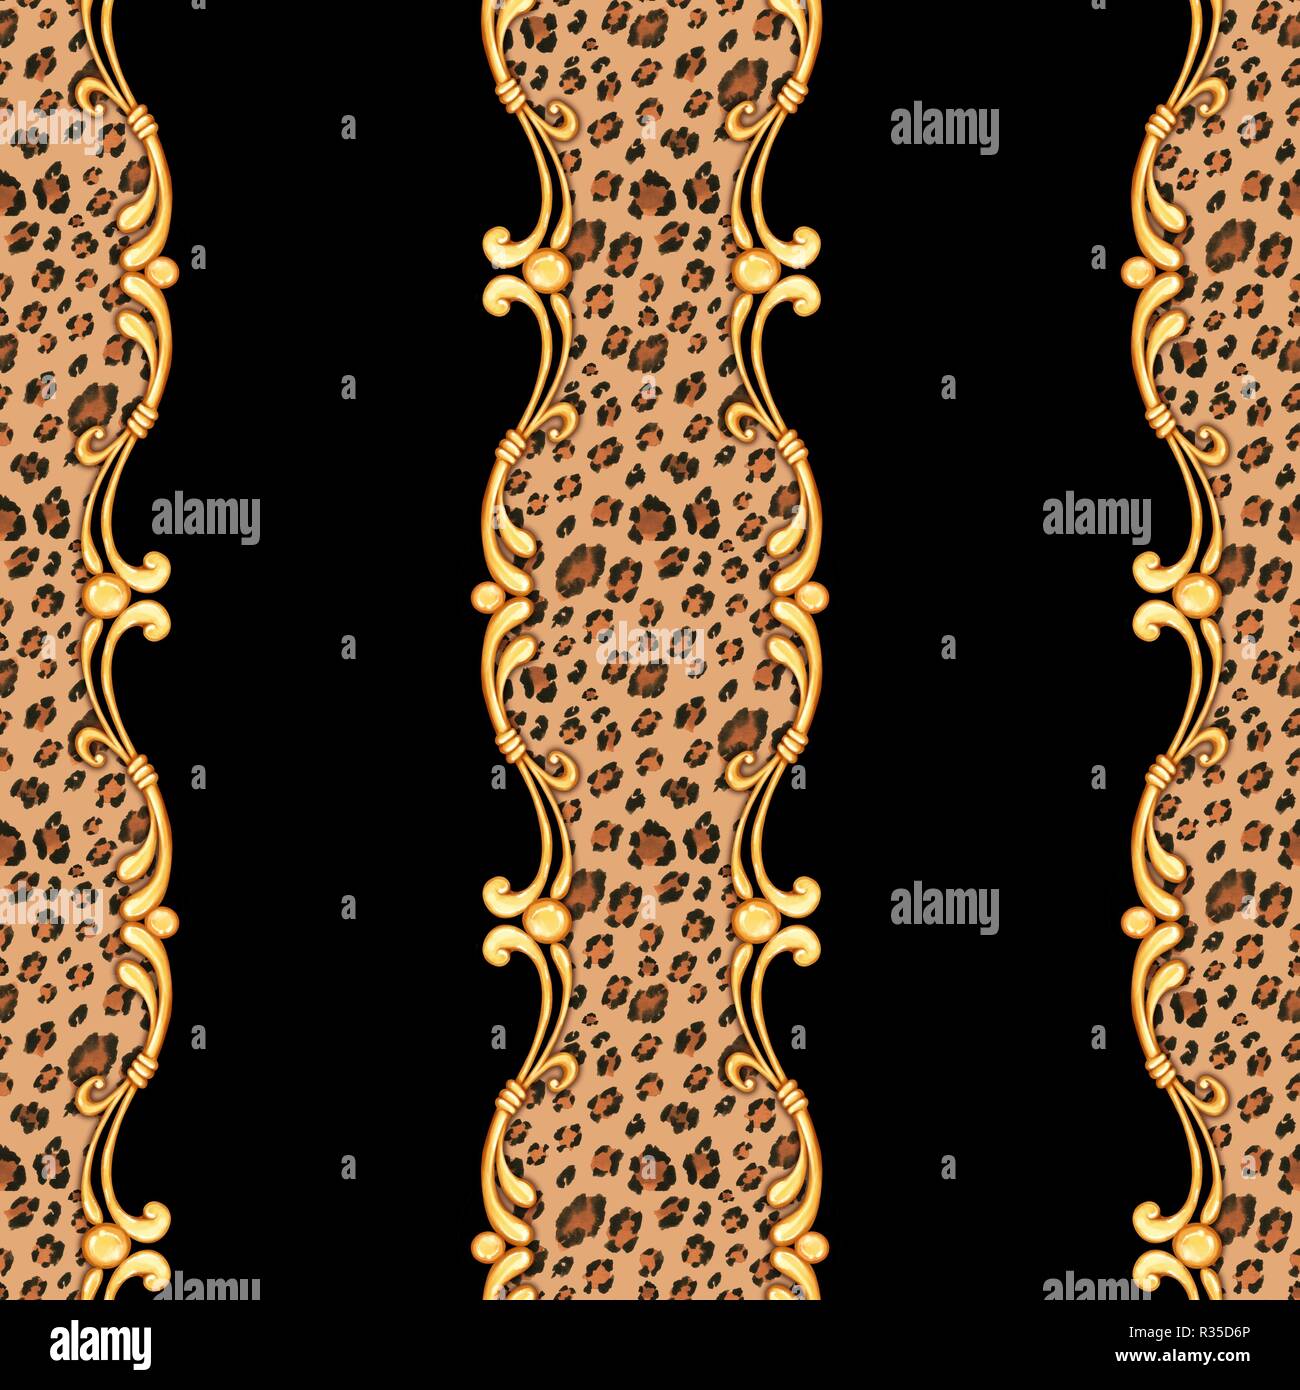 Seamless leopard pattern and golden baroque elements. Stock Photo